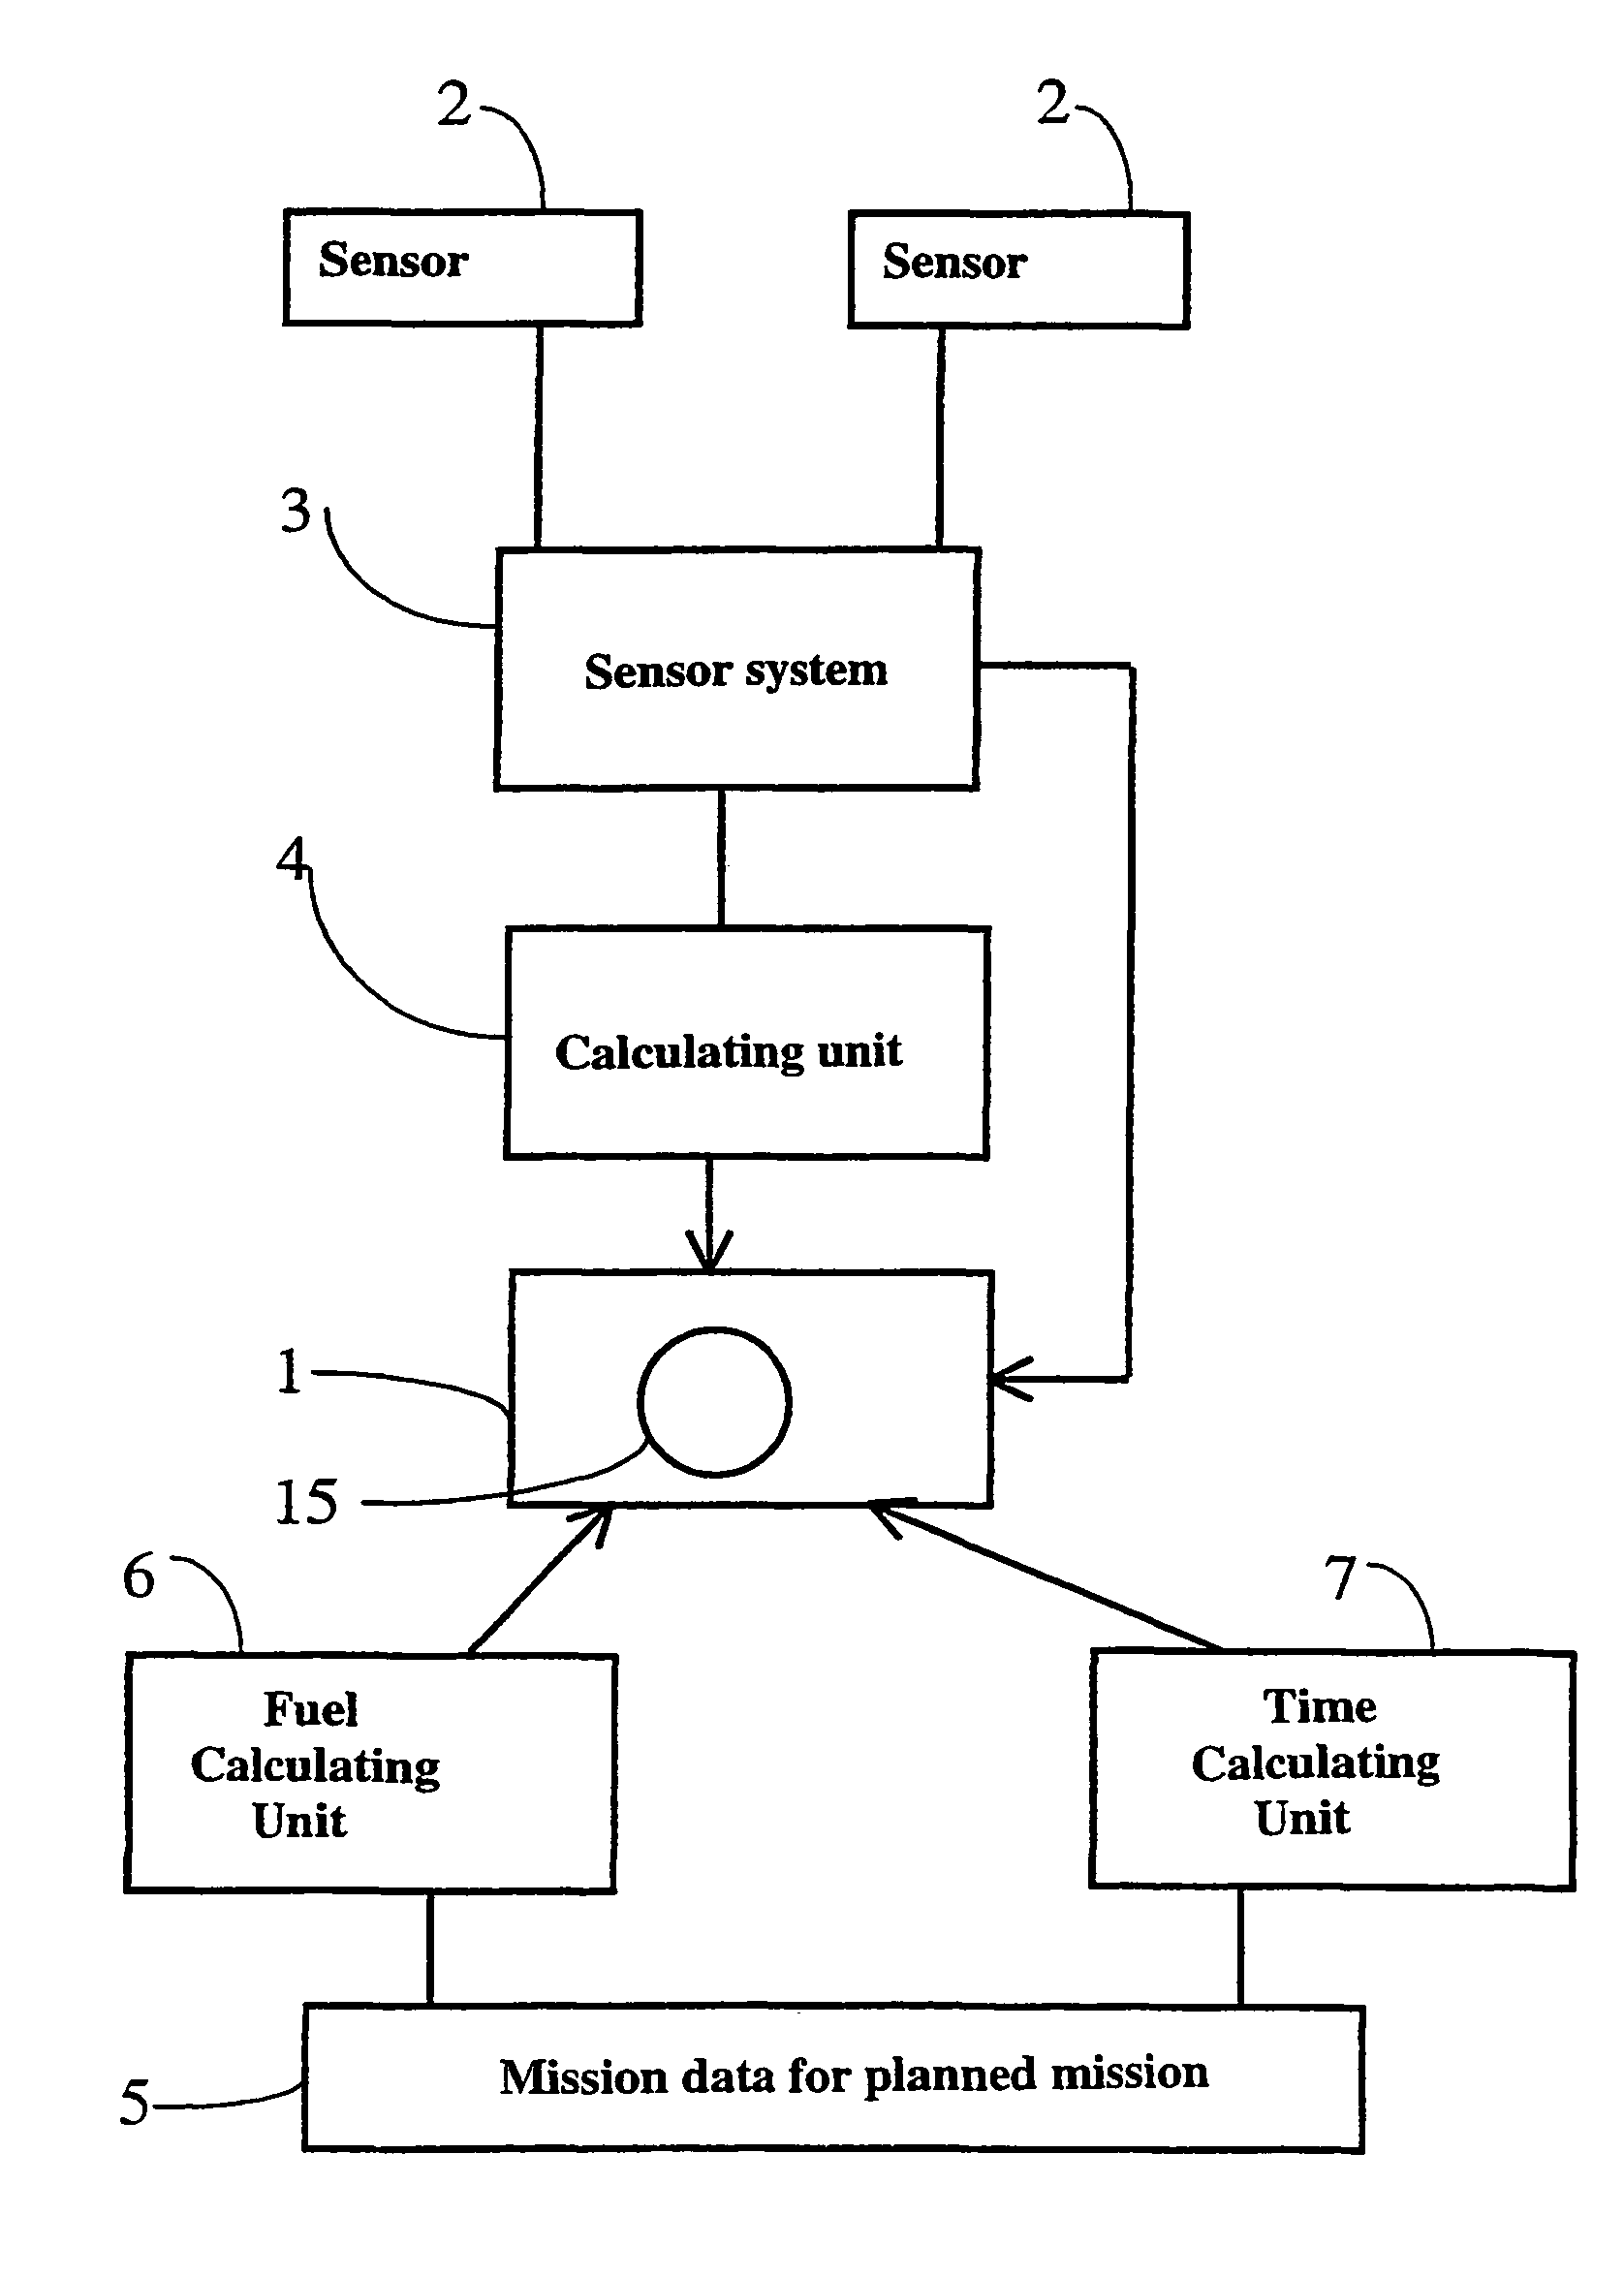 Display device for aircraft and method for displaying detected threats